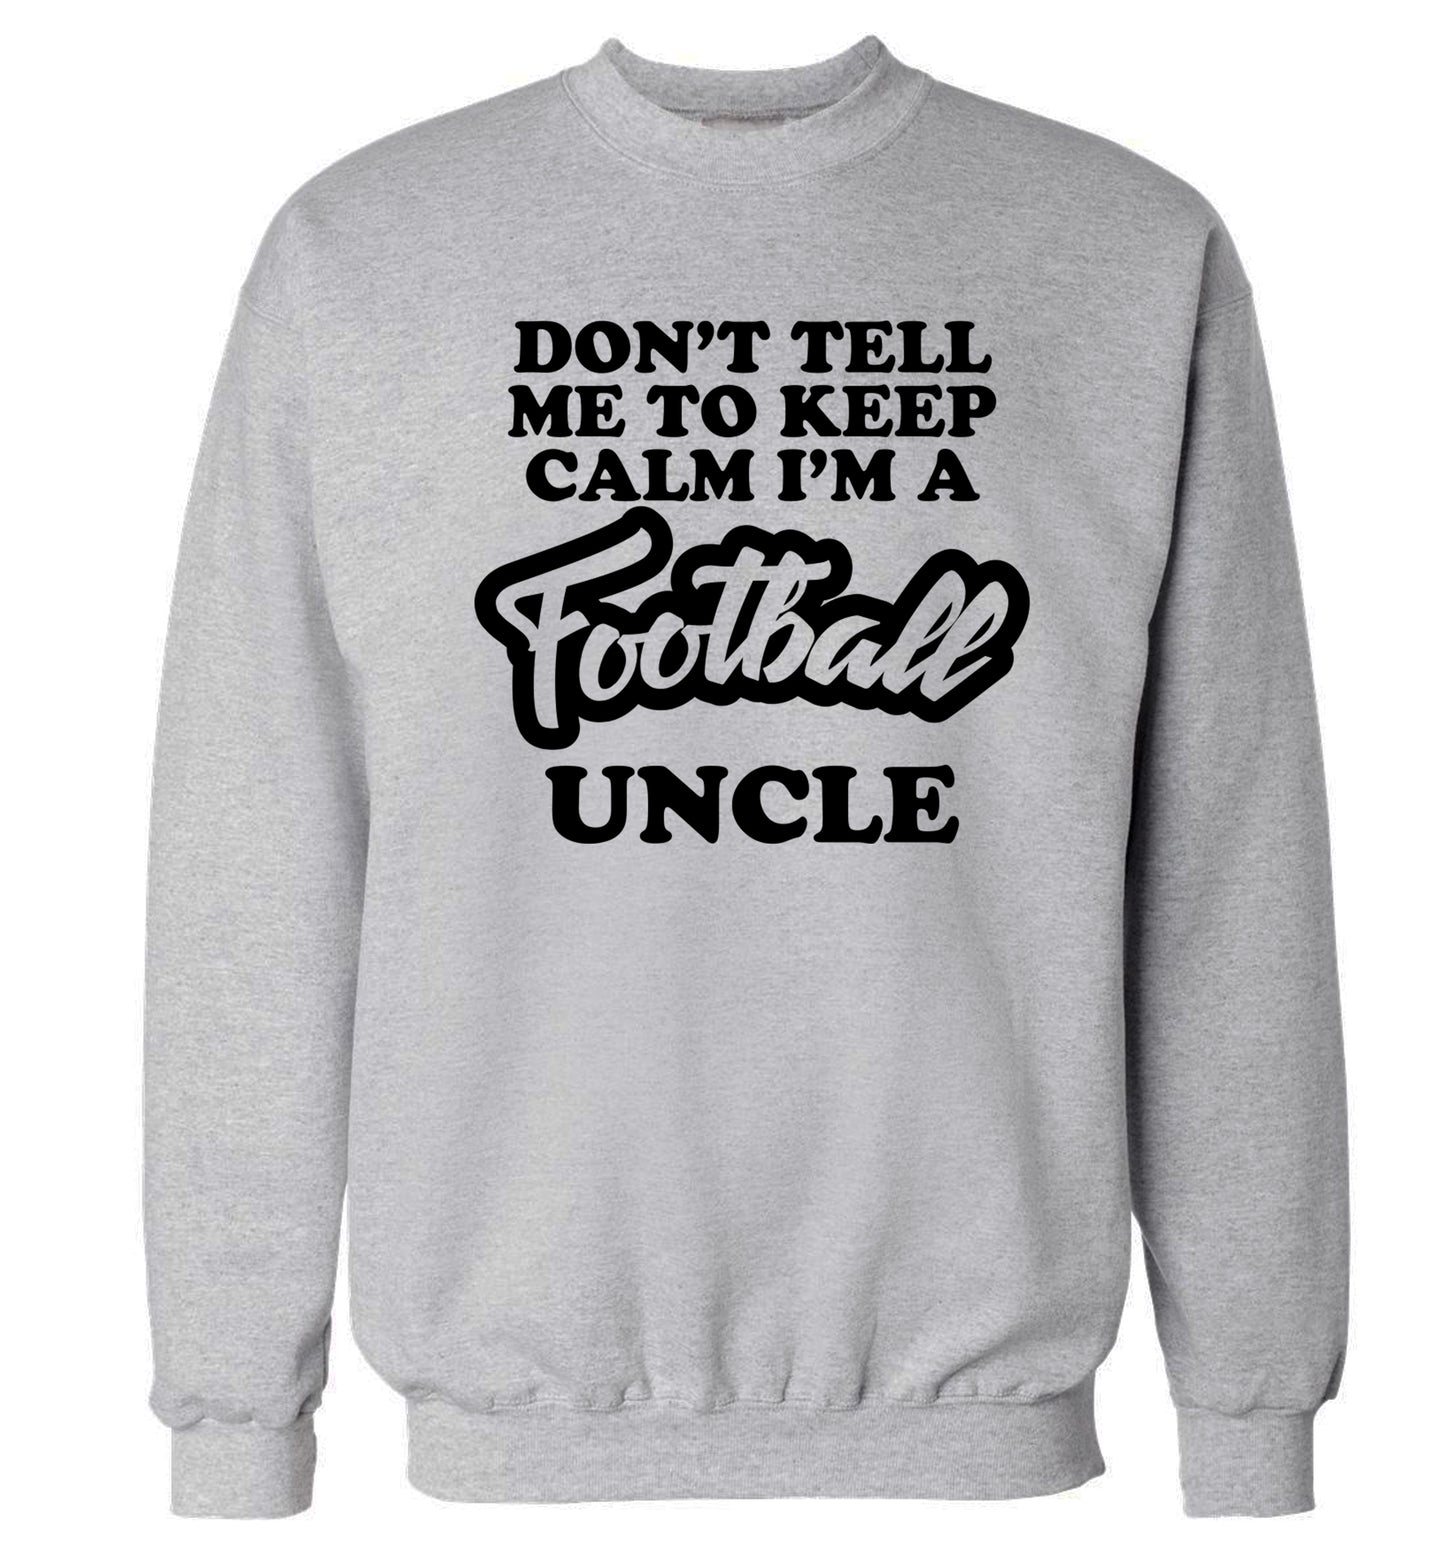 Don't tell me to keep calm I'm a football uncle Adult's unisexgrey Sweater 2XL